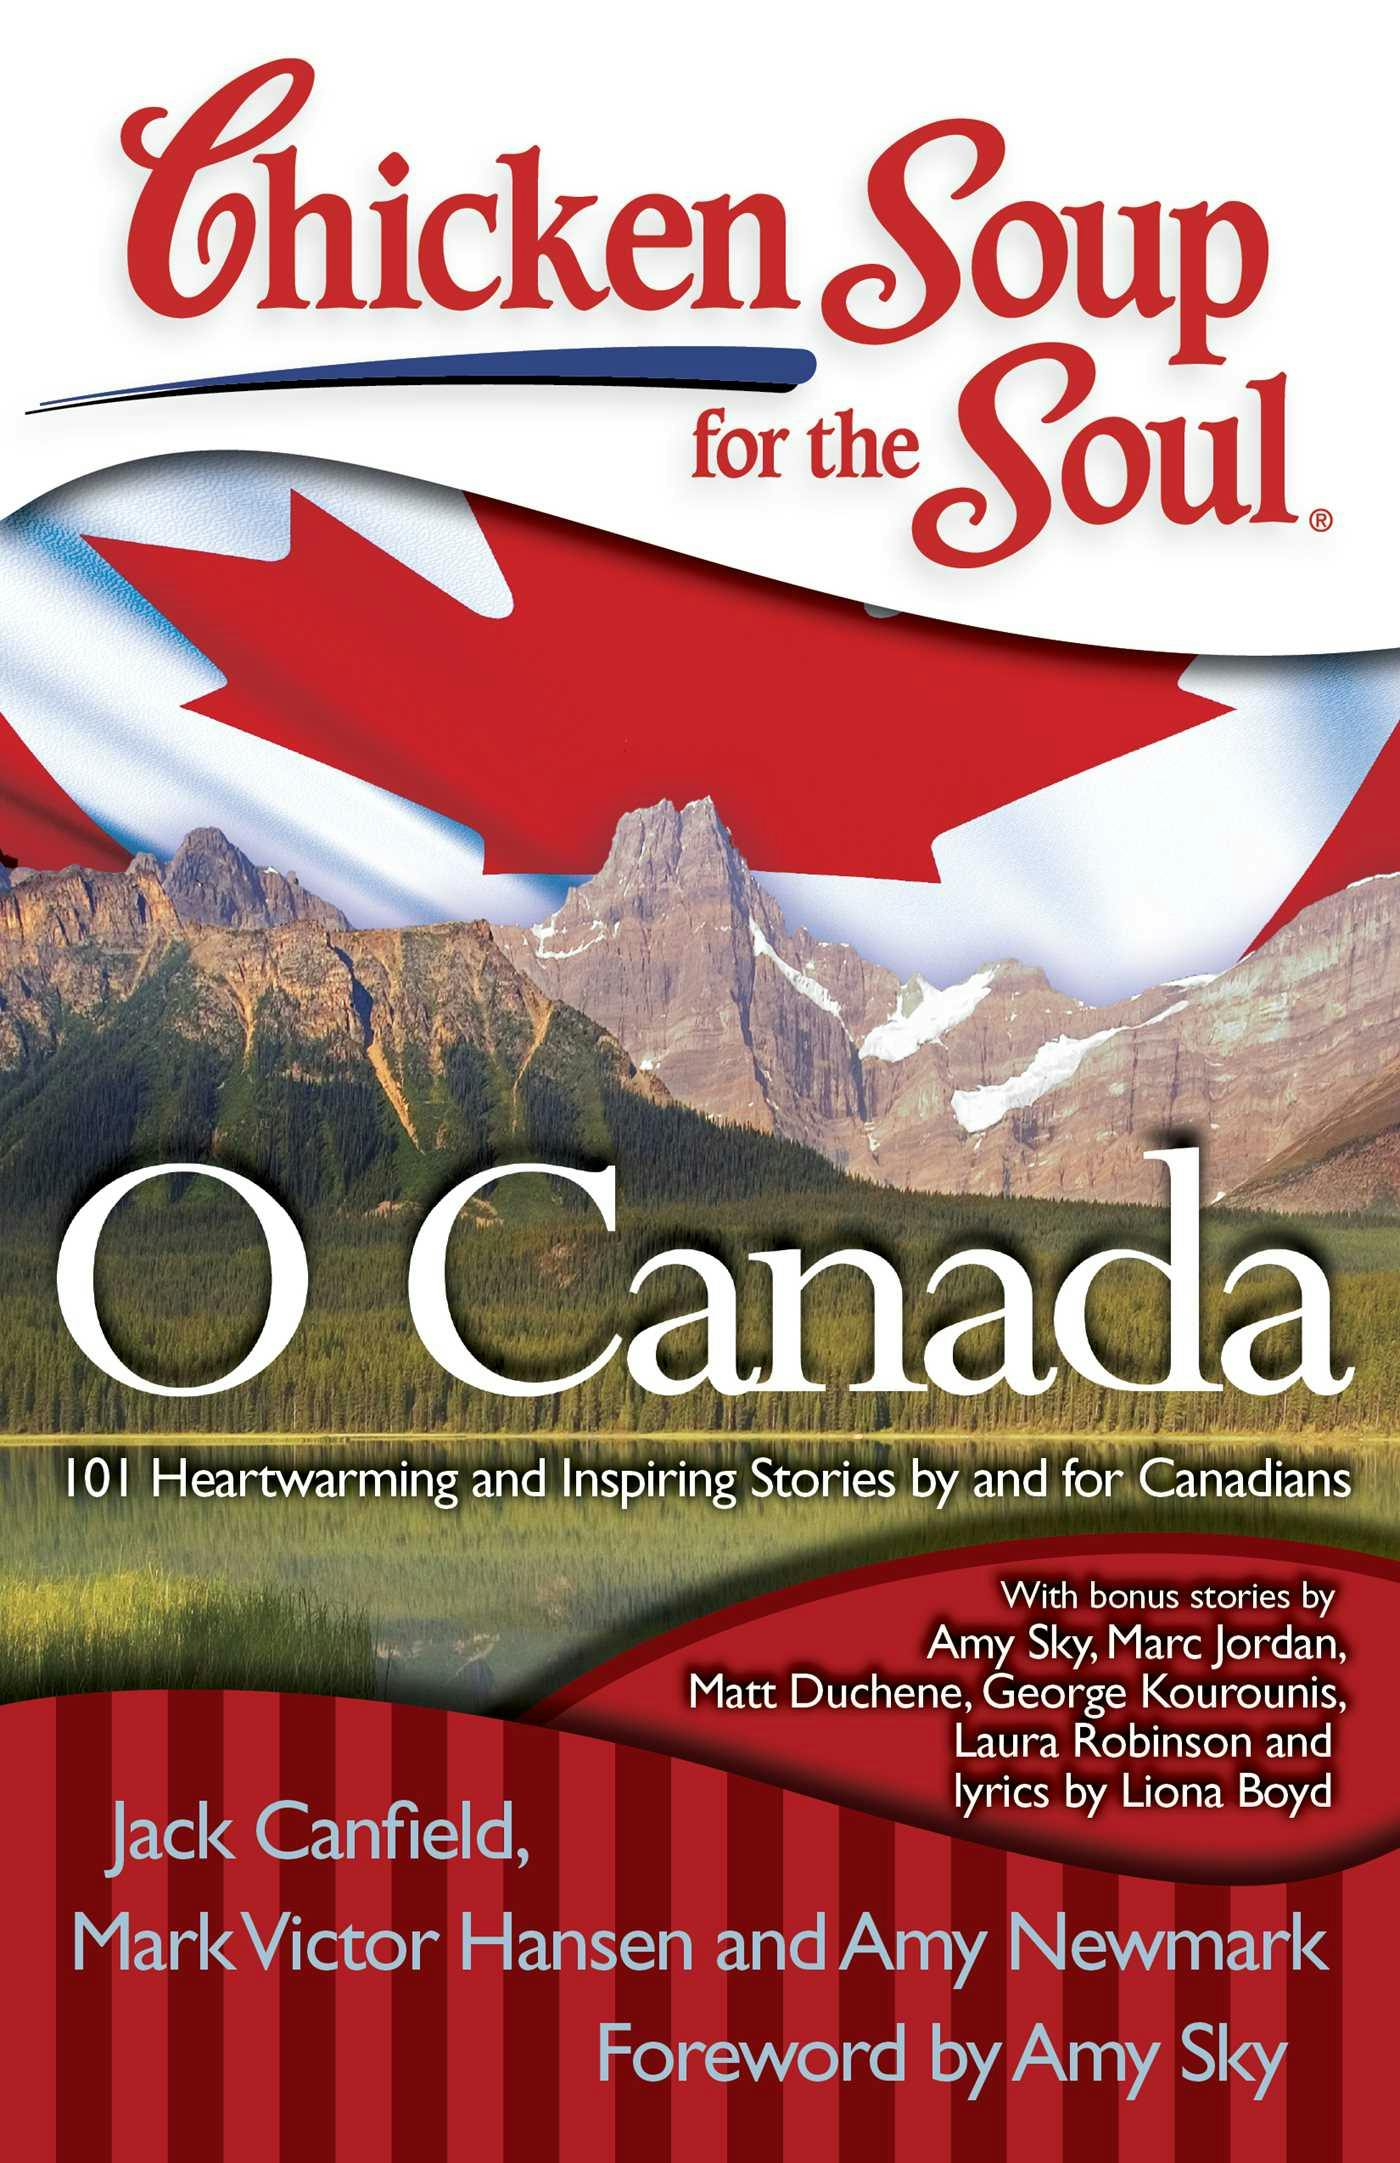 Chicken Soup for the Soul: O Canada: 101 Heartwarming and Inspiring Stories by and for Canadians - Mark Victor Hansen, Jack Canfield, Amy Newmark